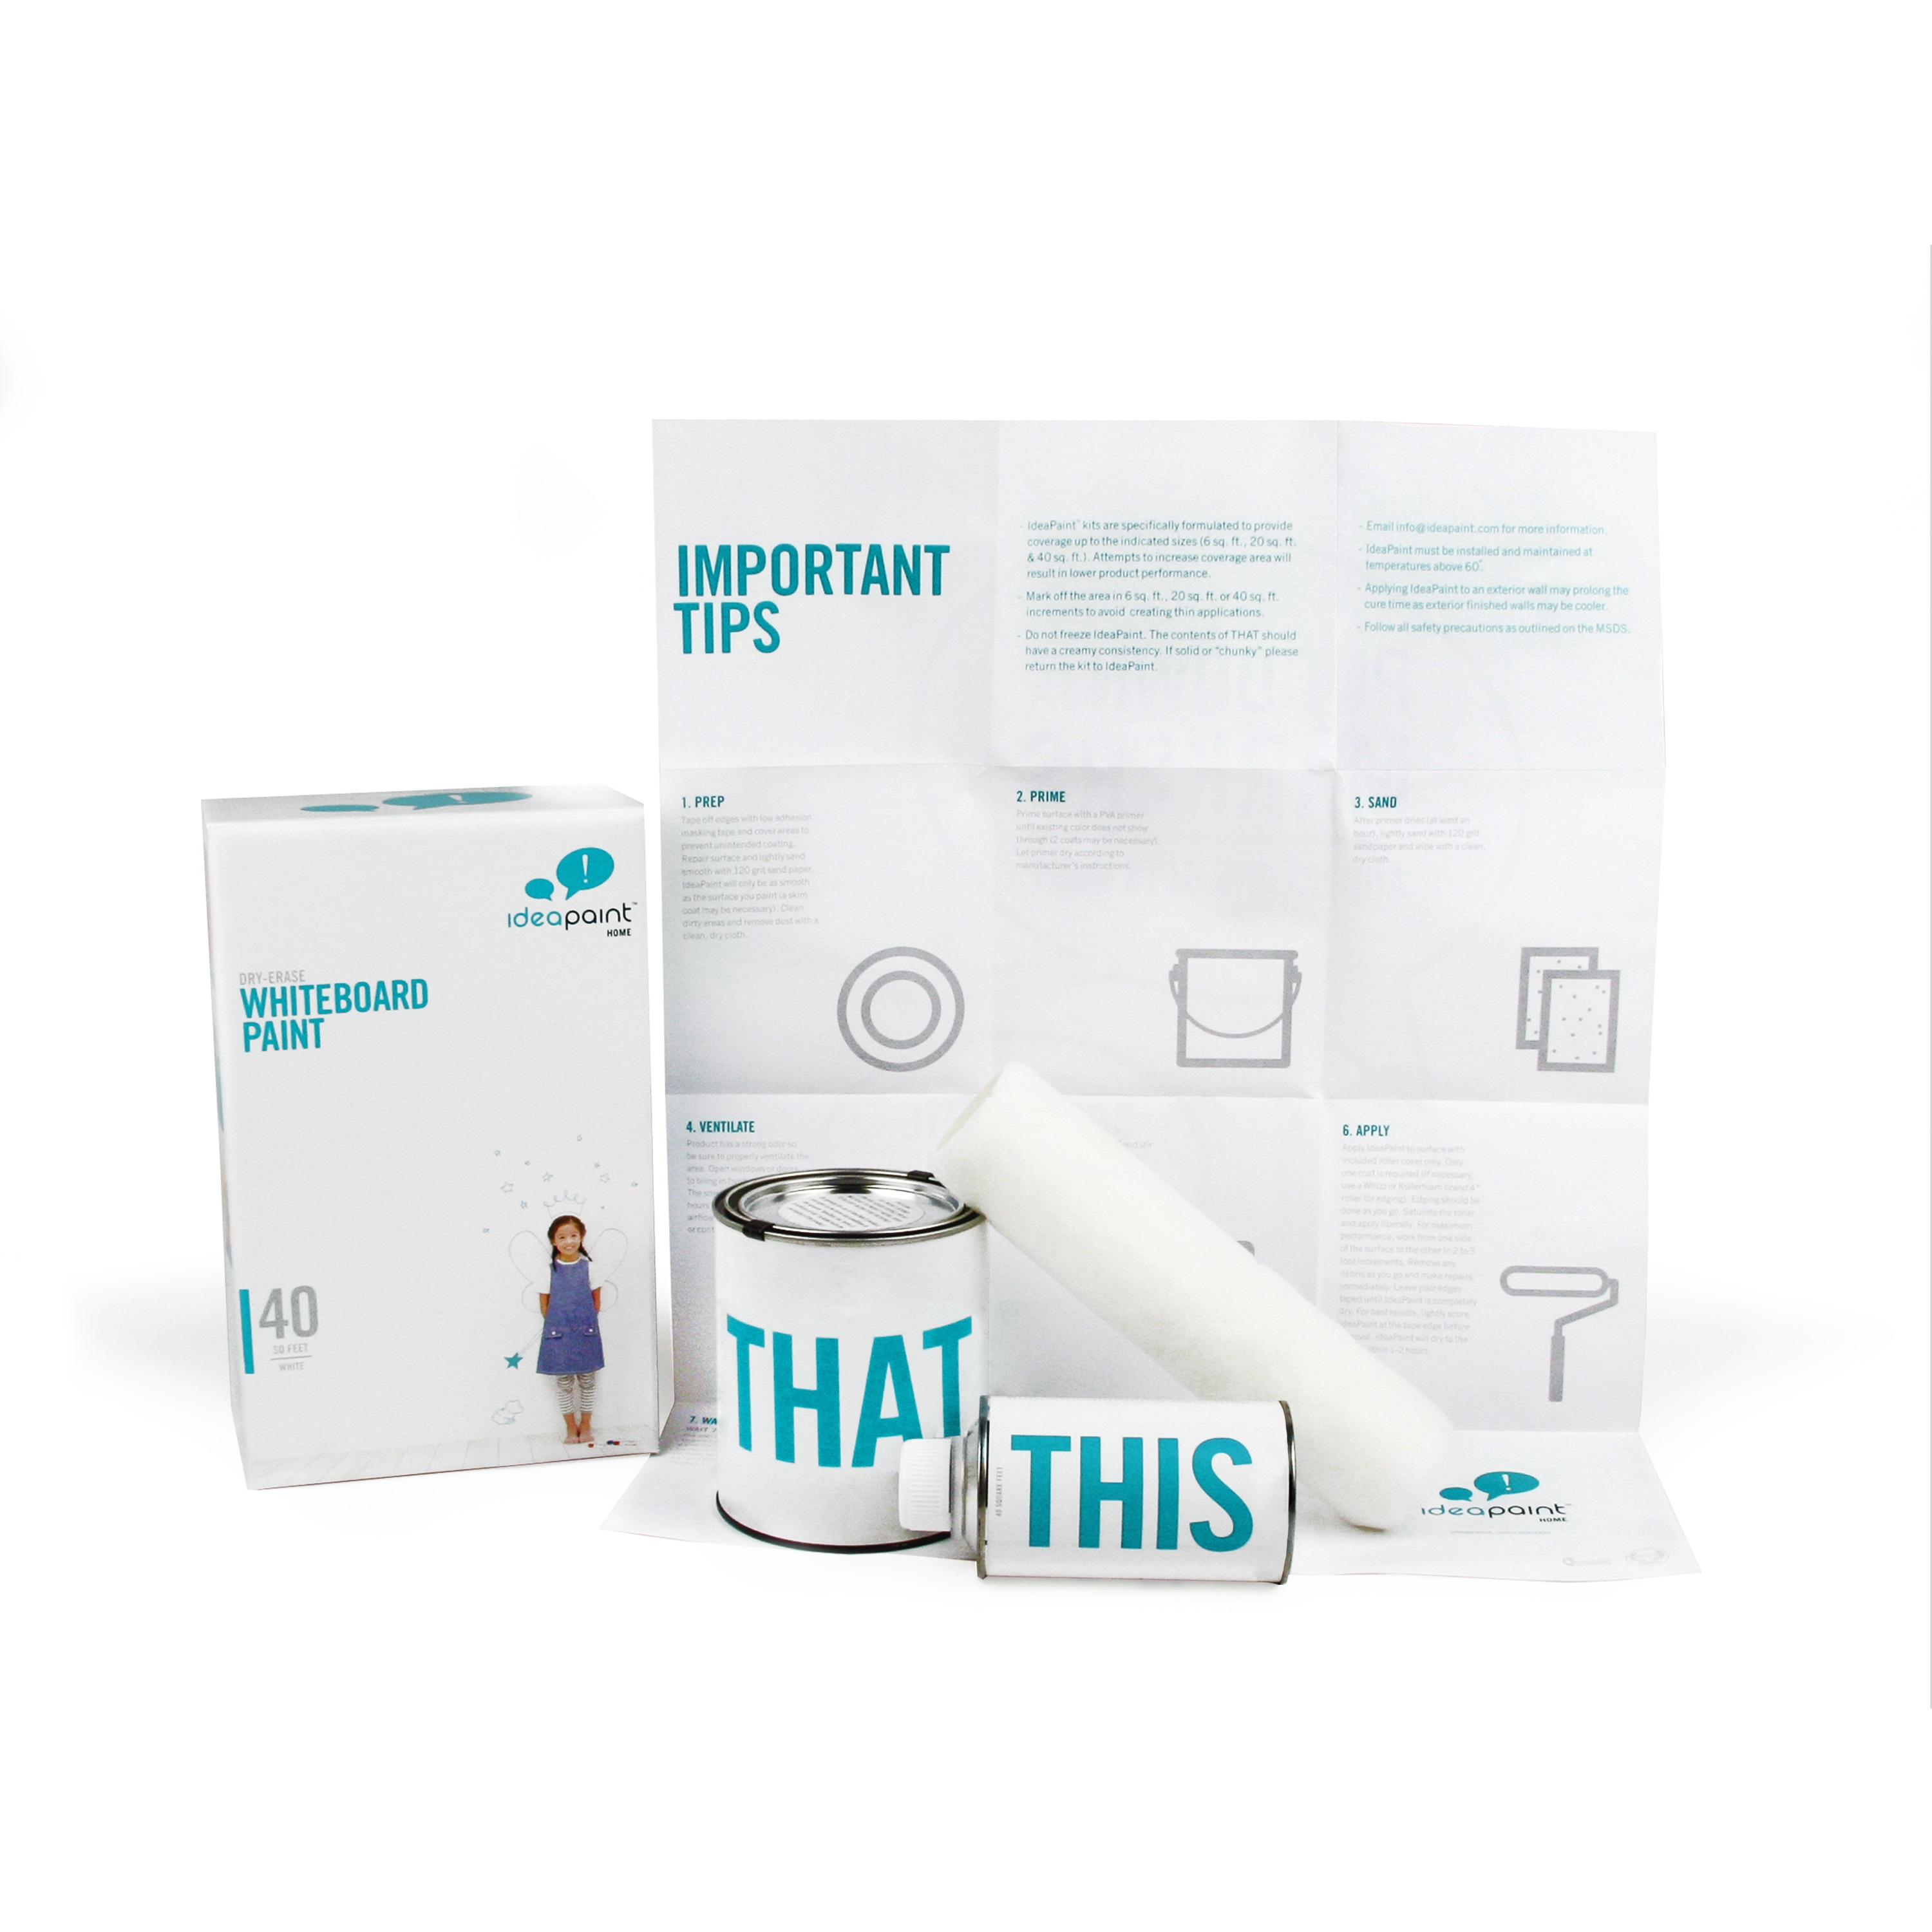 IDEAPAINT CREATE Series 50 sq. ft. Kit - Whiteboard Paint - White